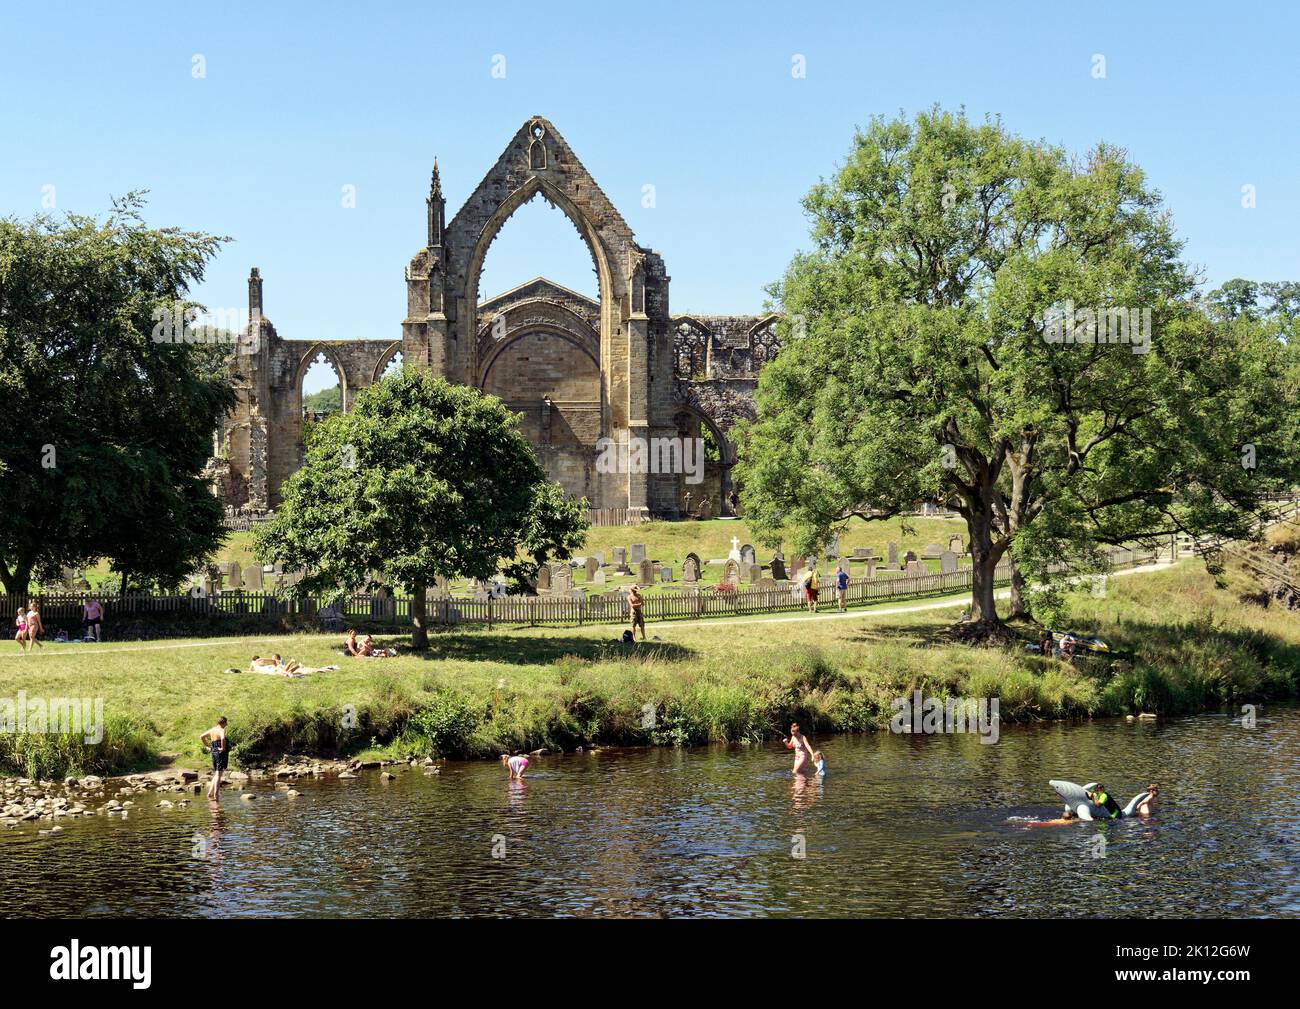 Bolton Abbey in Wharfedale, North Yorkshire, England, is named after the ruins of a 12th-century Augustinian monastery now known as Bolton Priory. Stock Photo